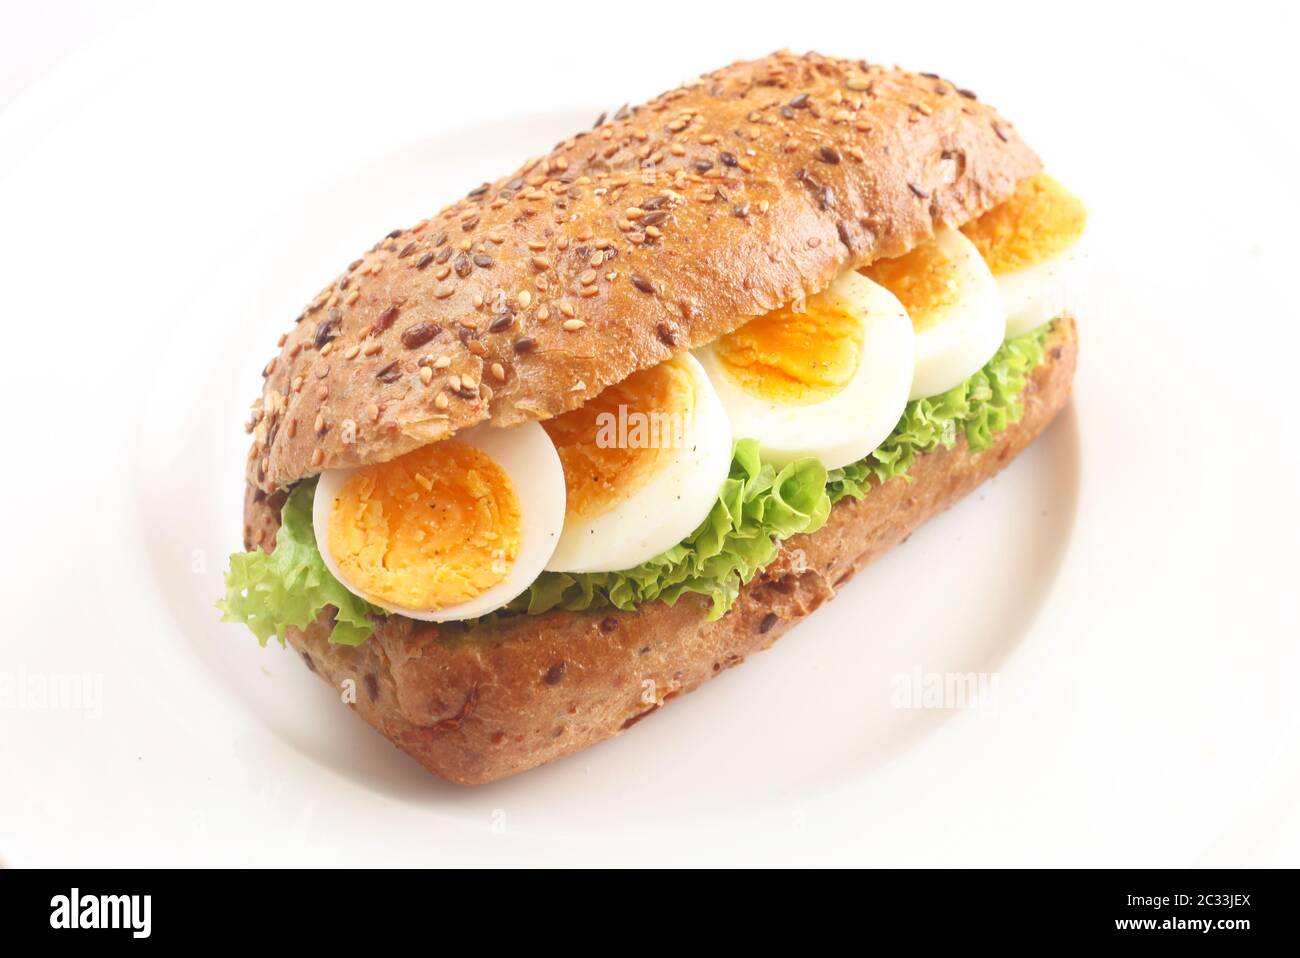 Multigrain Bread With Lettuce And Boiled Egg On A White Plate Stock Photo